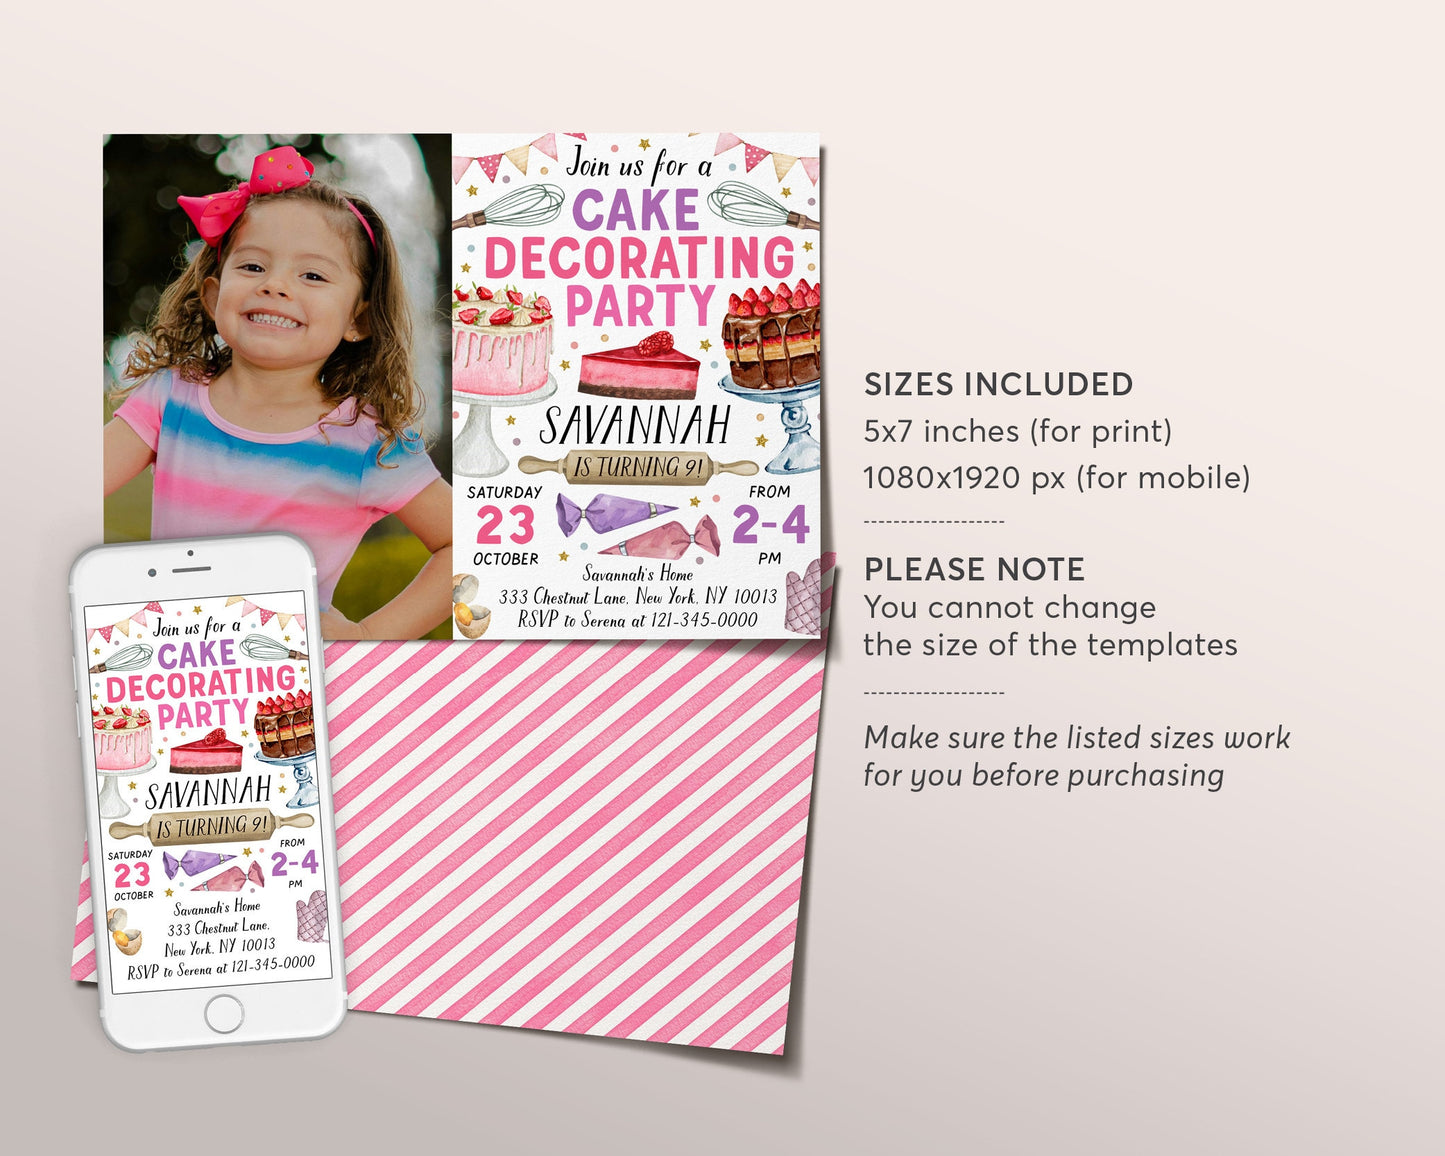 Cake Decorating Party Invitation With Photo Editable Template, Girl Baking Birthday Evite, Kids Preteen Chef Cooking Party Invite Bake Shop